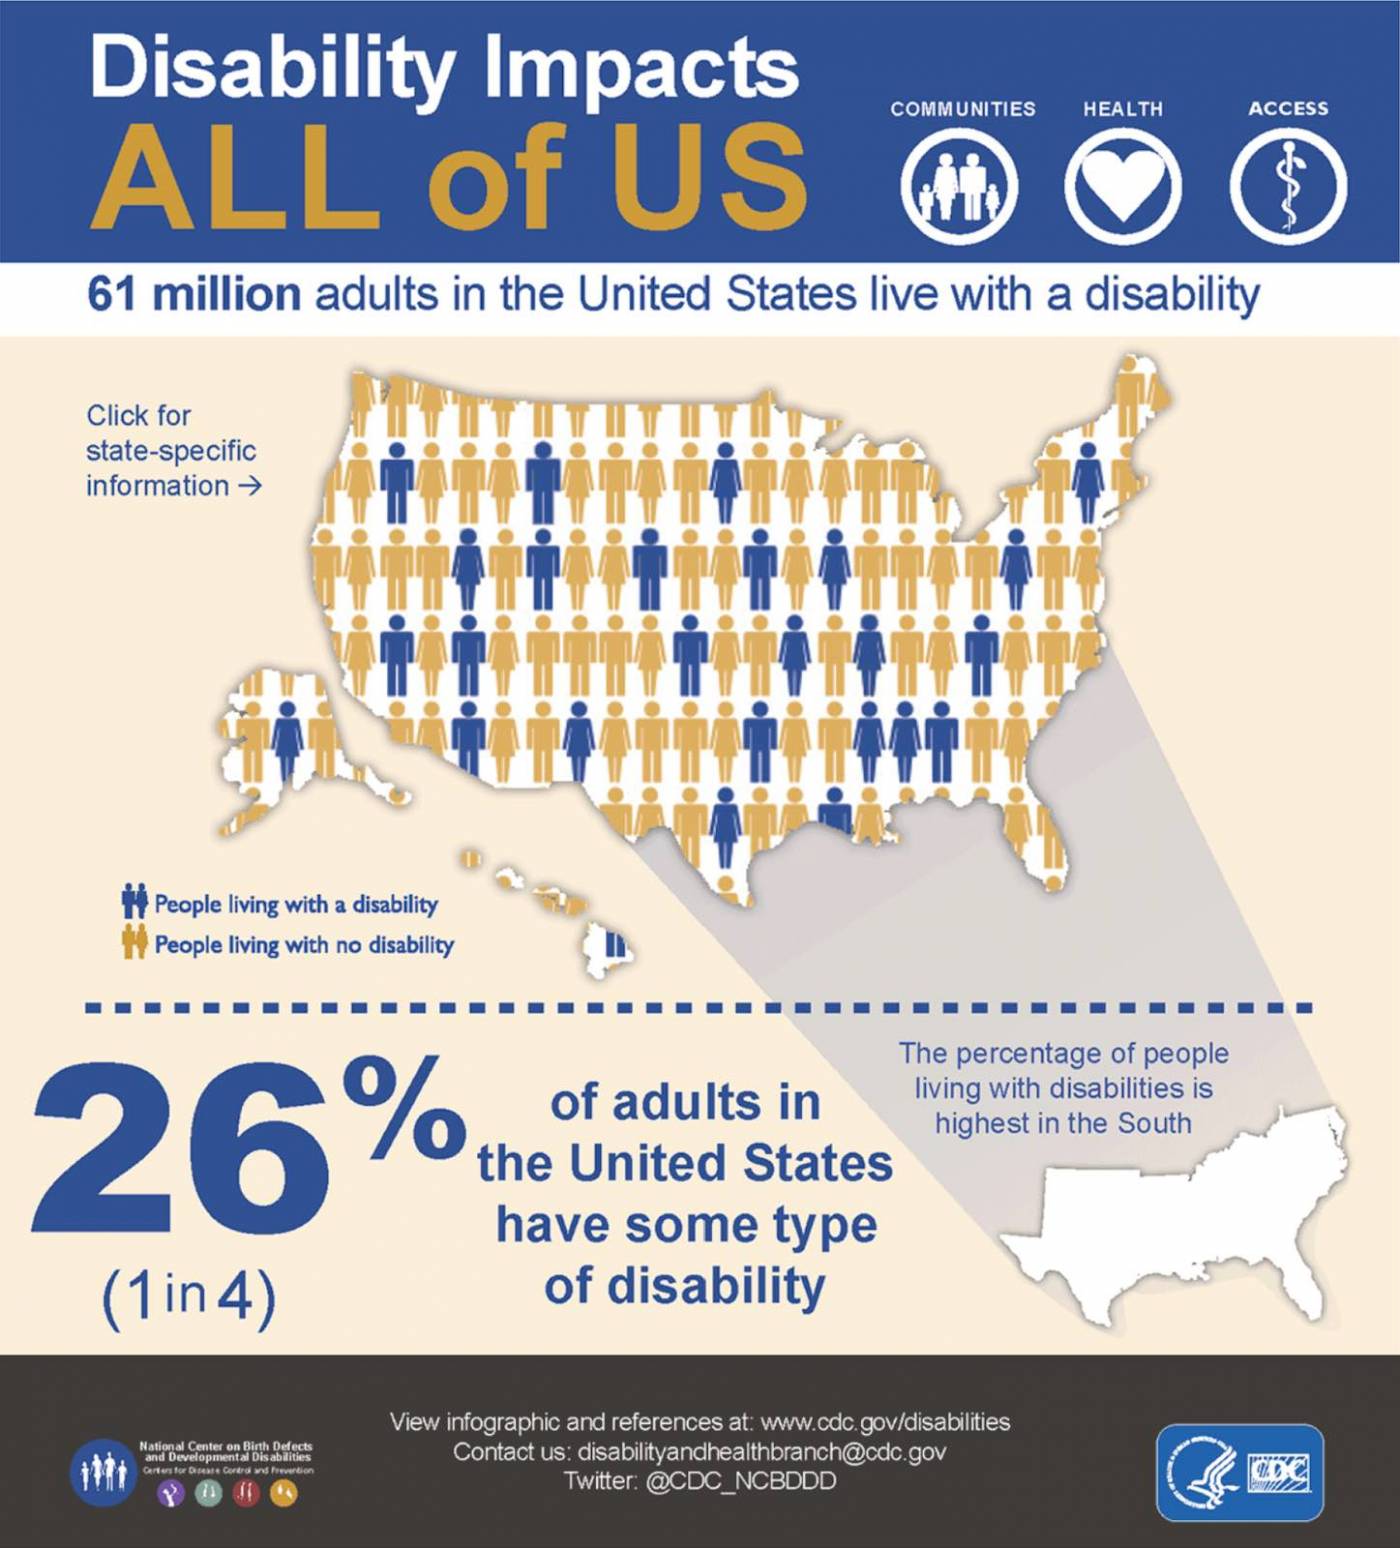 An infographic titled “Disability Impacts ALL of US'' in white and tan fonts on a blue background. Three white circular icons with 4 cartoon people, a heart, and a staff with one snake wrapped around are to the right of the title. These are labeled “Communities,” “Health,” and “Access,” respectively. Following a white band with blue text reading “61 million adults in the United States live with a disability” there is an outline of the United States with cartoon figures filling the image. One in four figures are blue, with the rest in dark tan- to the left of the outline is a key, with blue figures labeled “People living with a disability” and dark tan figures labeled “People living with no disability.” Underneath a blue dashed line, in blue font, is written “26 percent (one in 4) of adults in the United States have some type of disability.” To the right of that text is an outline of the South of the United States and the text “The percentage of people living with disabilities is highest in the South.” The bottom of the image shows a dark gray banner with the text “National Center on Birth Defects and Developmental Disabilities. Centers for Disease Control and Prevention. View infographic and references at: www.cdc.gov/disabilities/, Contact us: disabilityandhealthbranch@cdc.gov, Twitter: @cdc_ncbddd.” (1)